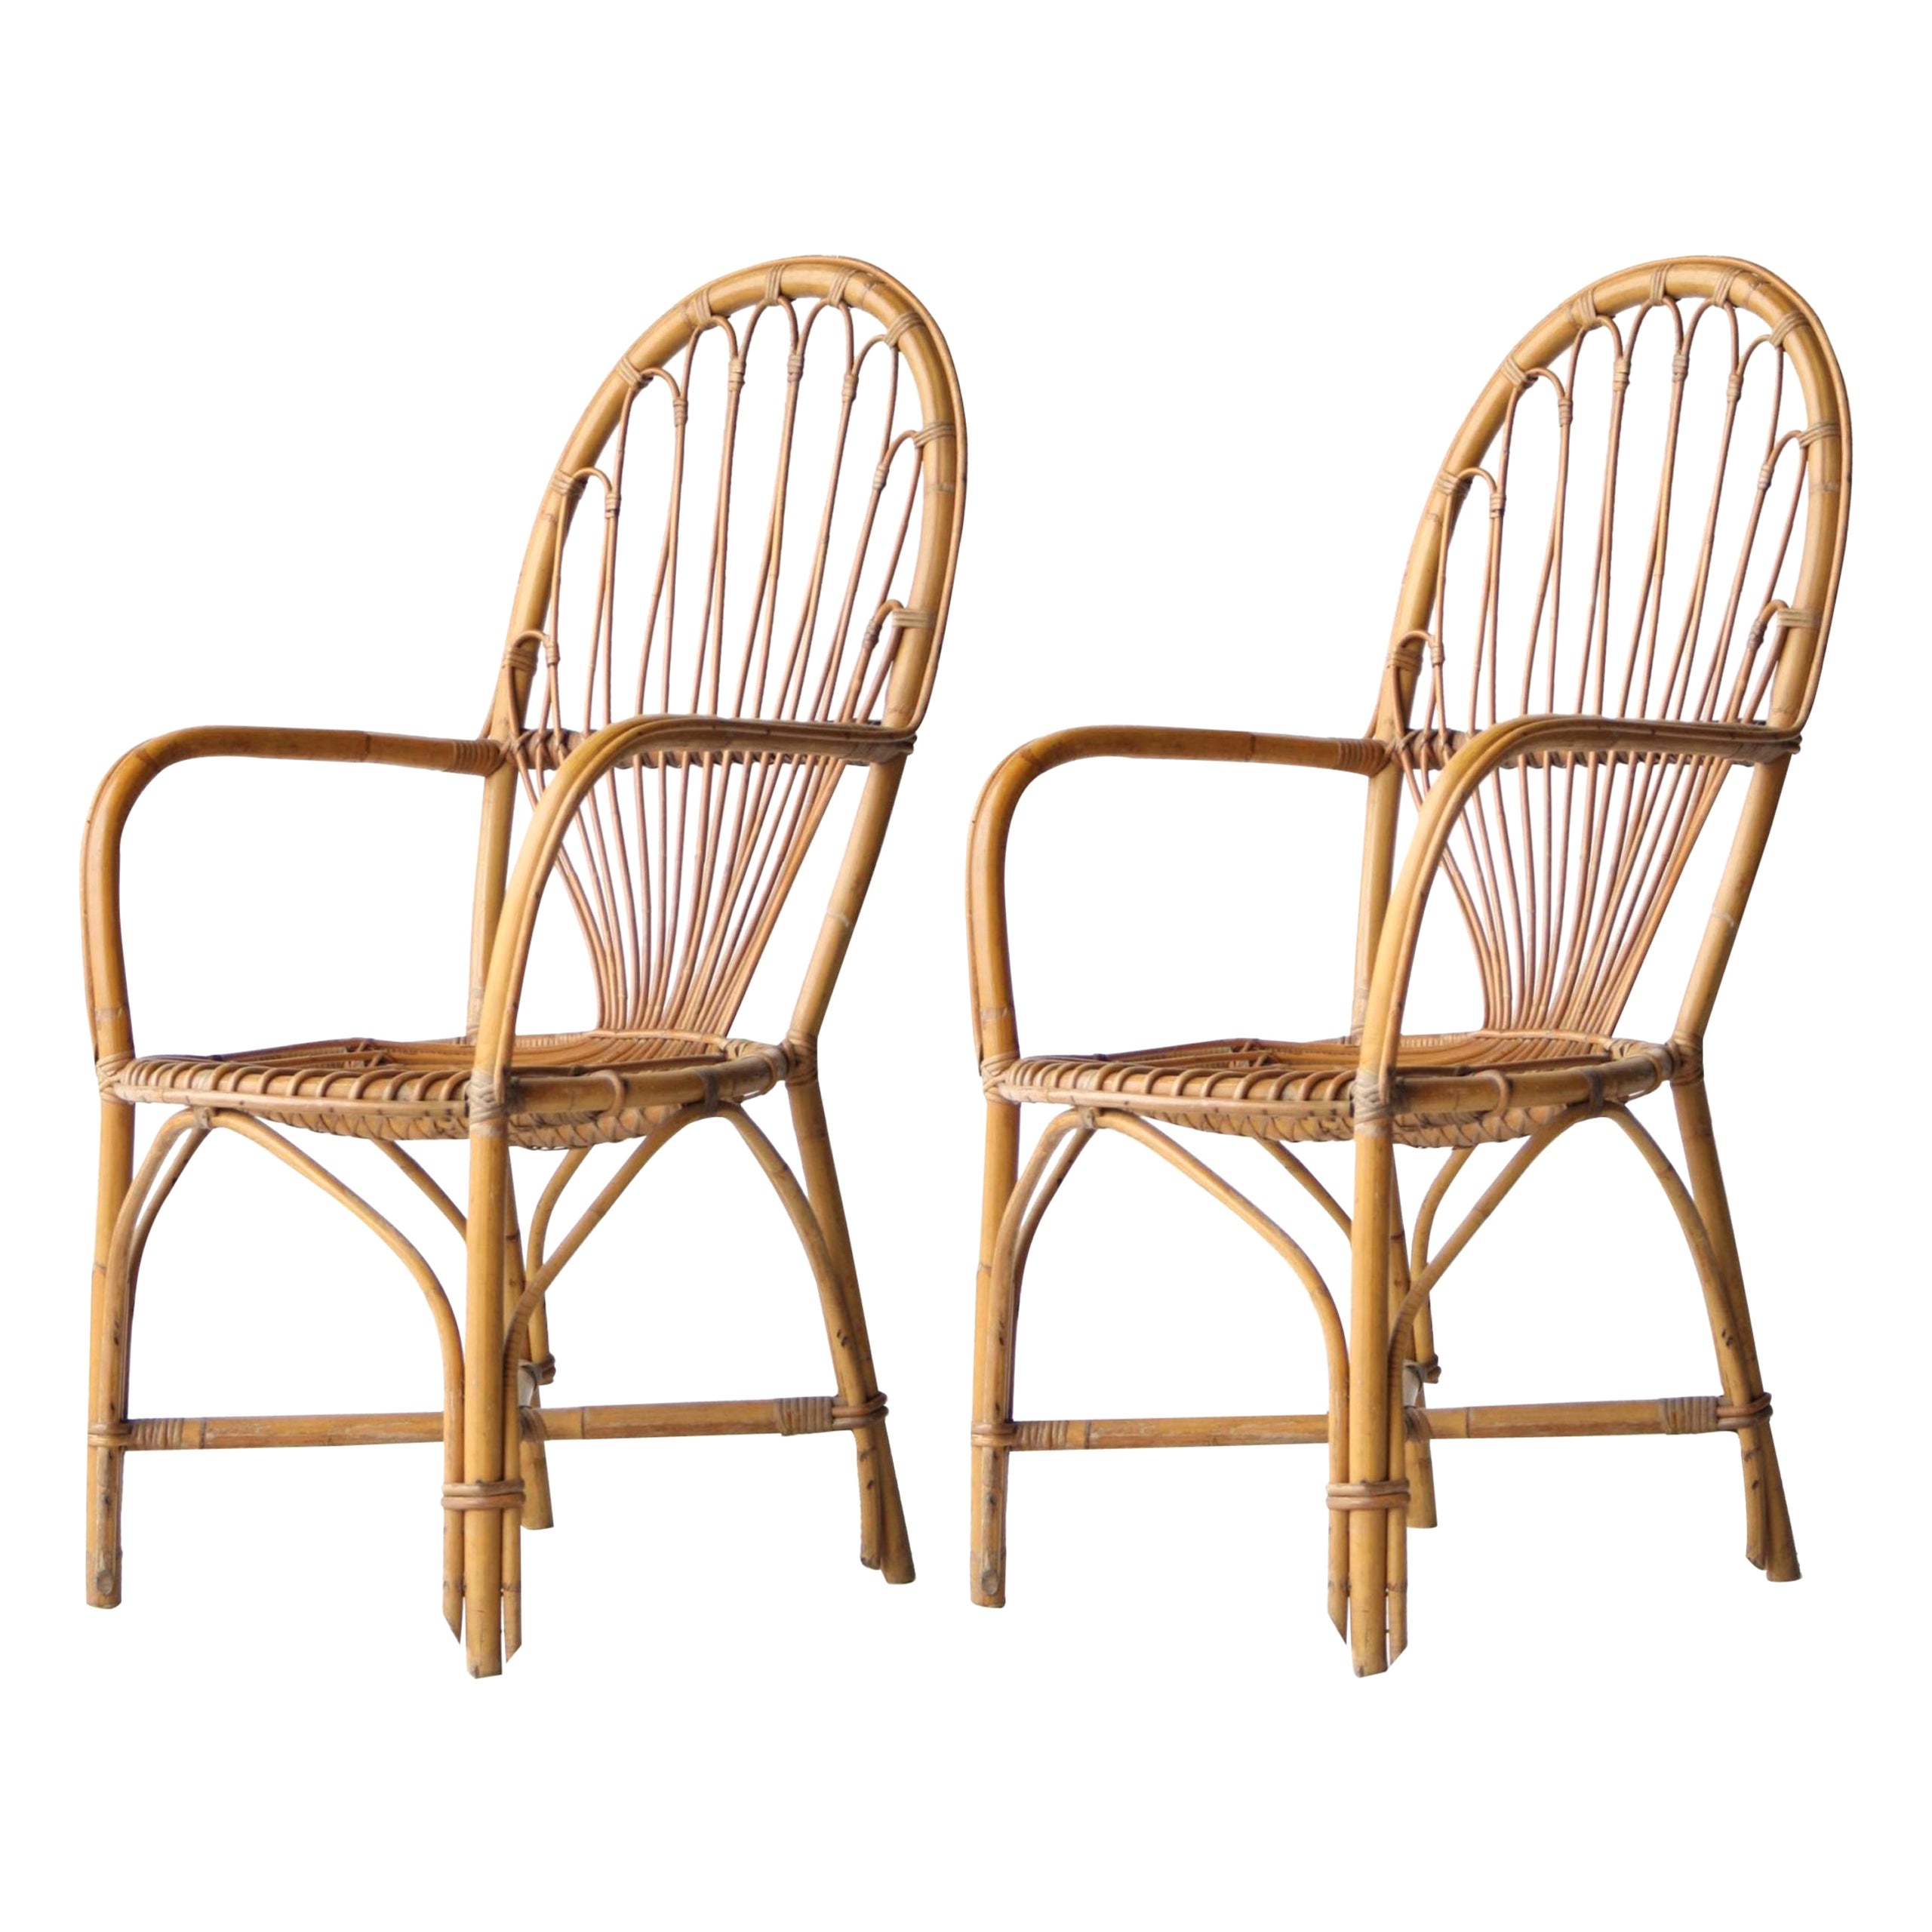 Midcentury Bamboo Wicker Pair of Armchairs, France, 1970 For Sale